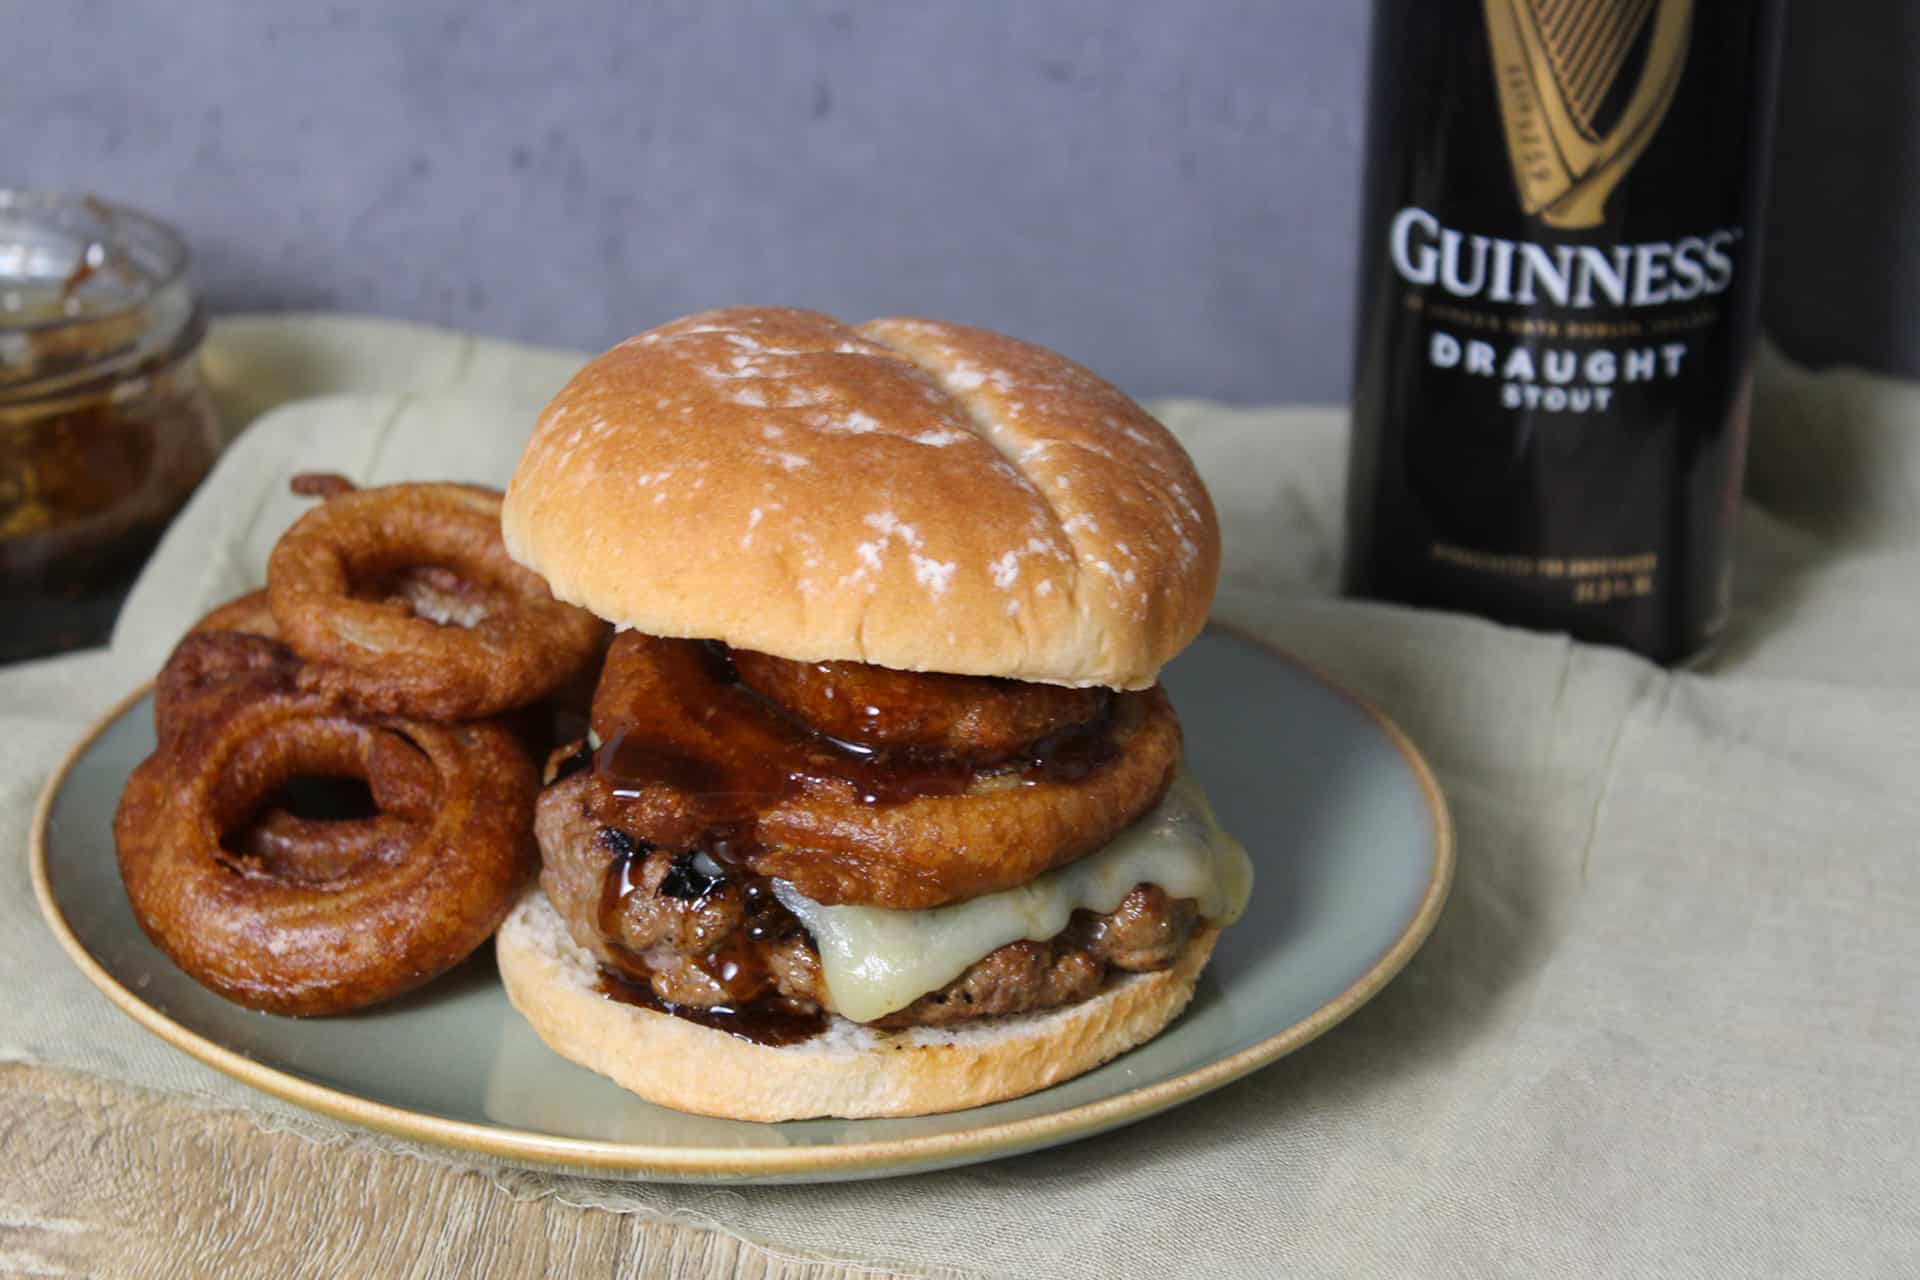 A burger topped with cheese, onion rings, and Guinness glaze on a potato bun